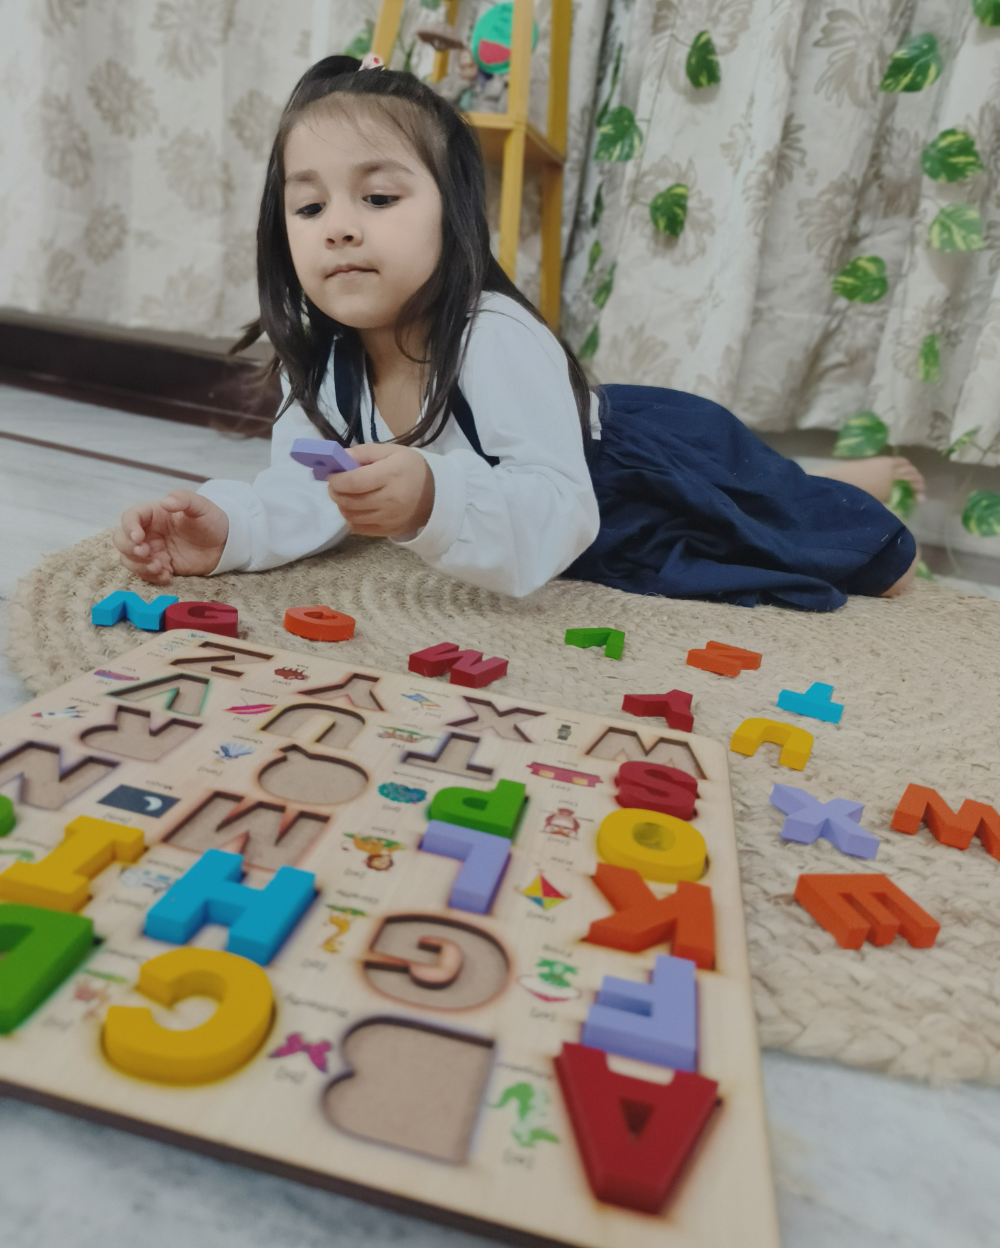 Capital Alphabet Wooden Board with girl